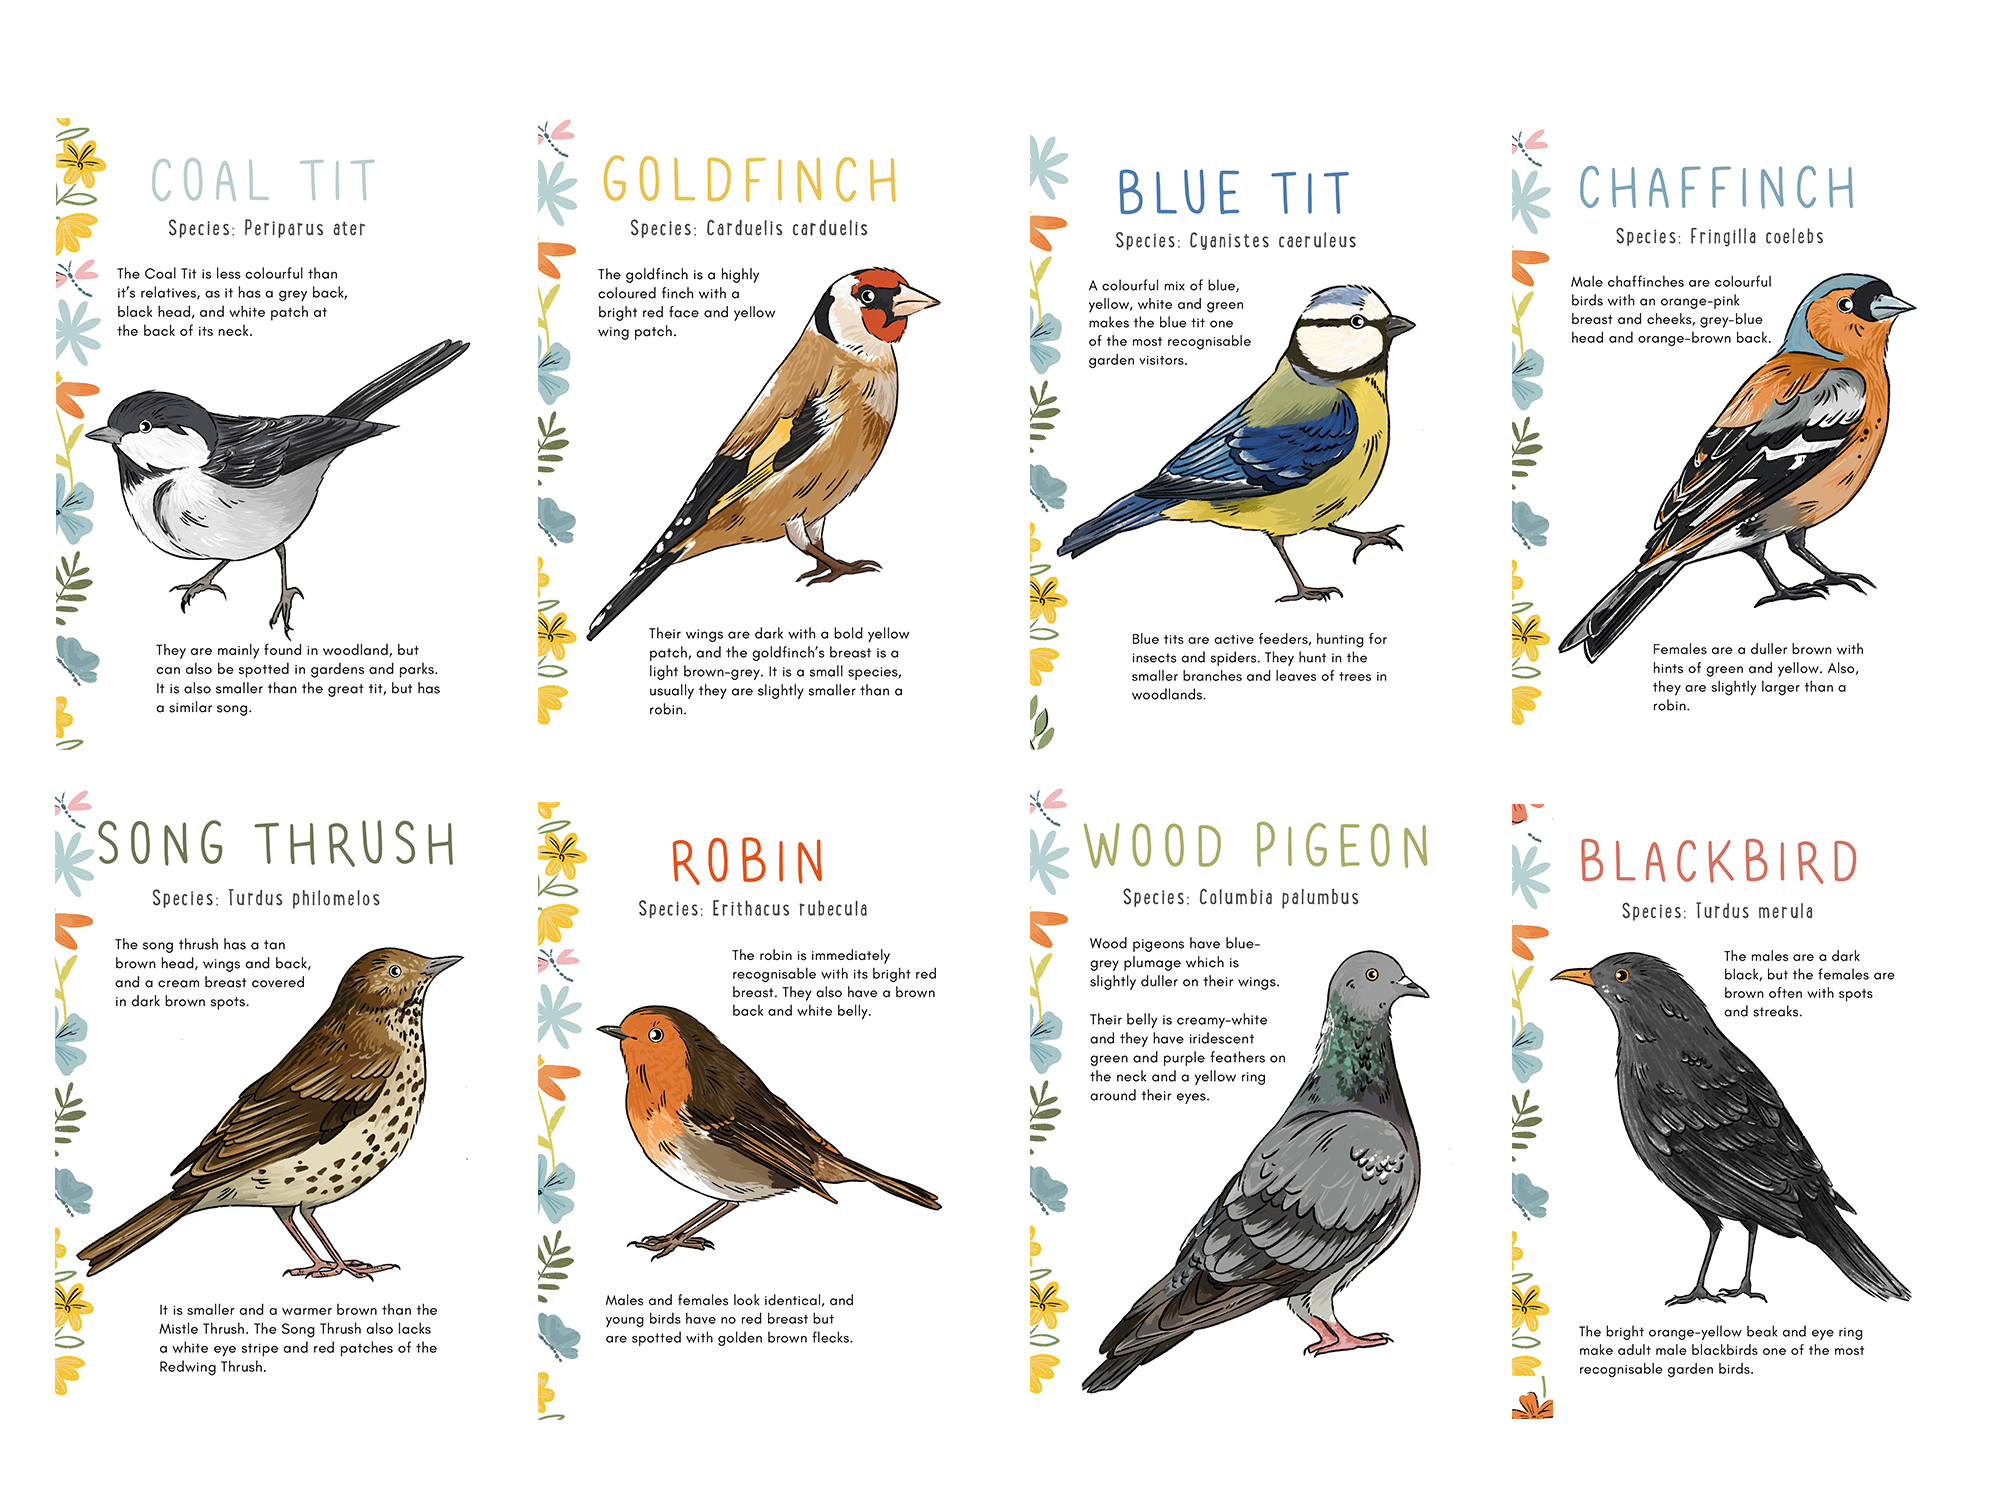 BA Illustration work by Emily Johnson showing educational flashcards about garden birds.